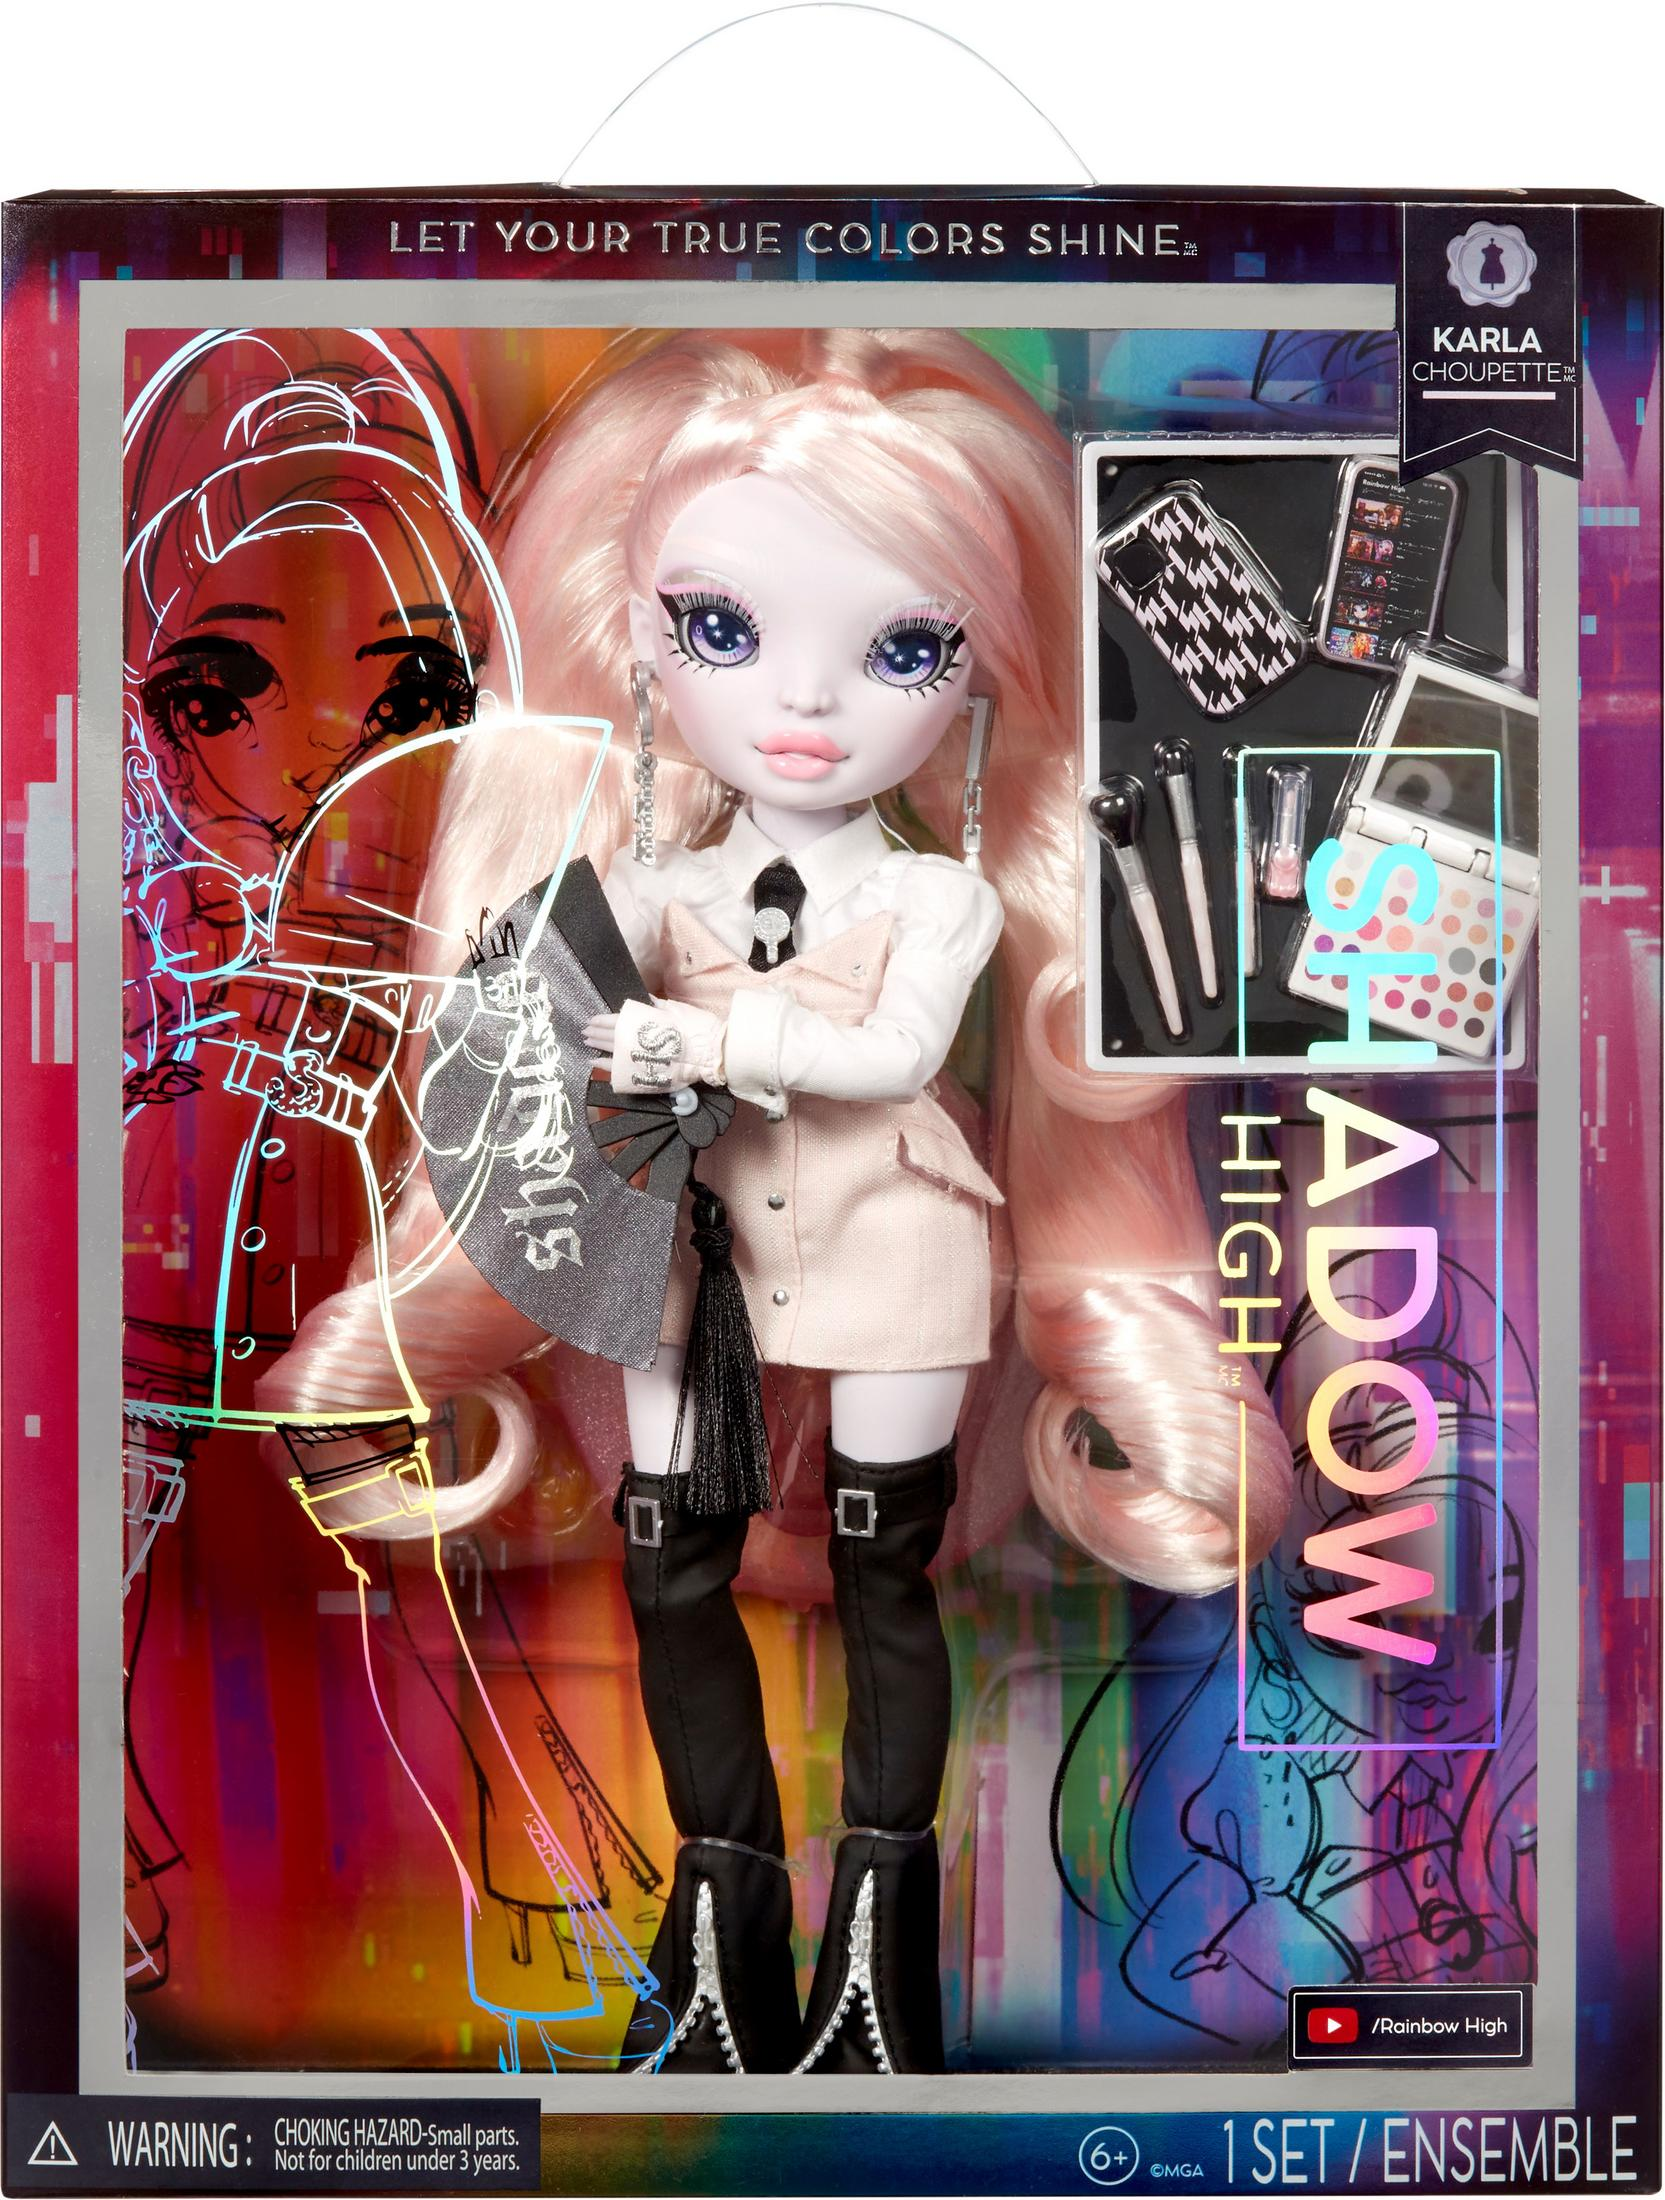 583042 MGA FASHION Rosa CARAMEL Spielzeugpuppe HIGH DOLL-IP (PINK) 8X26.5G ENTERTAINMENT